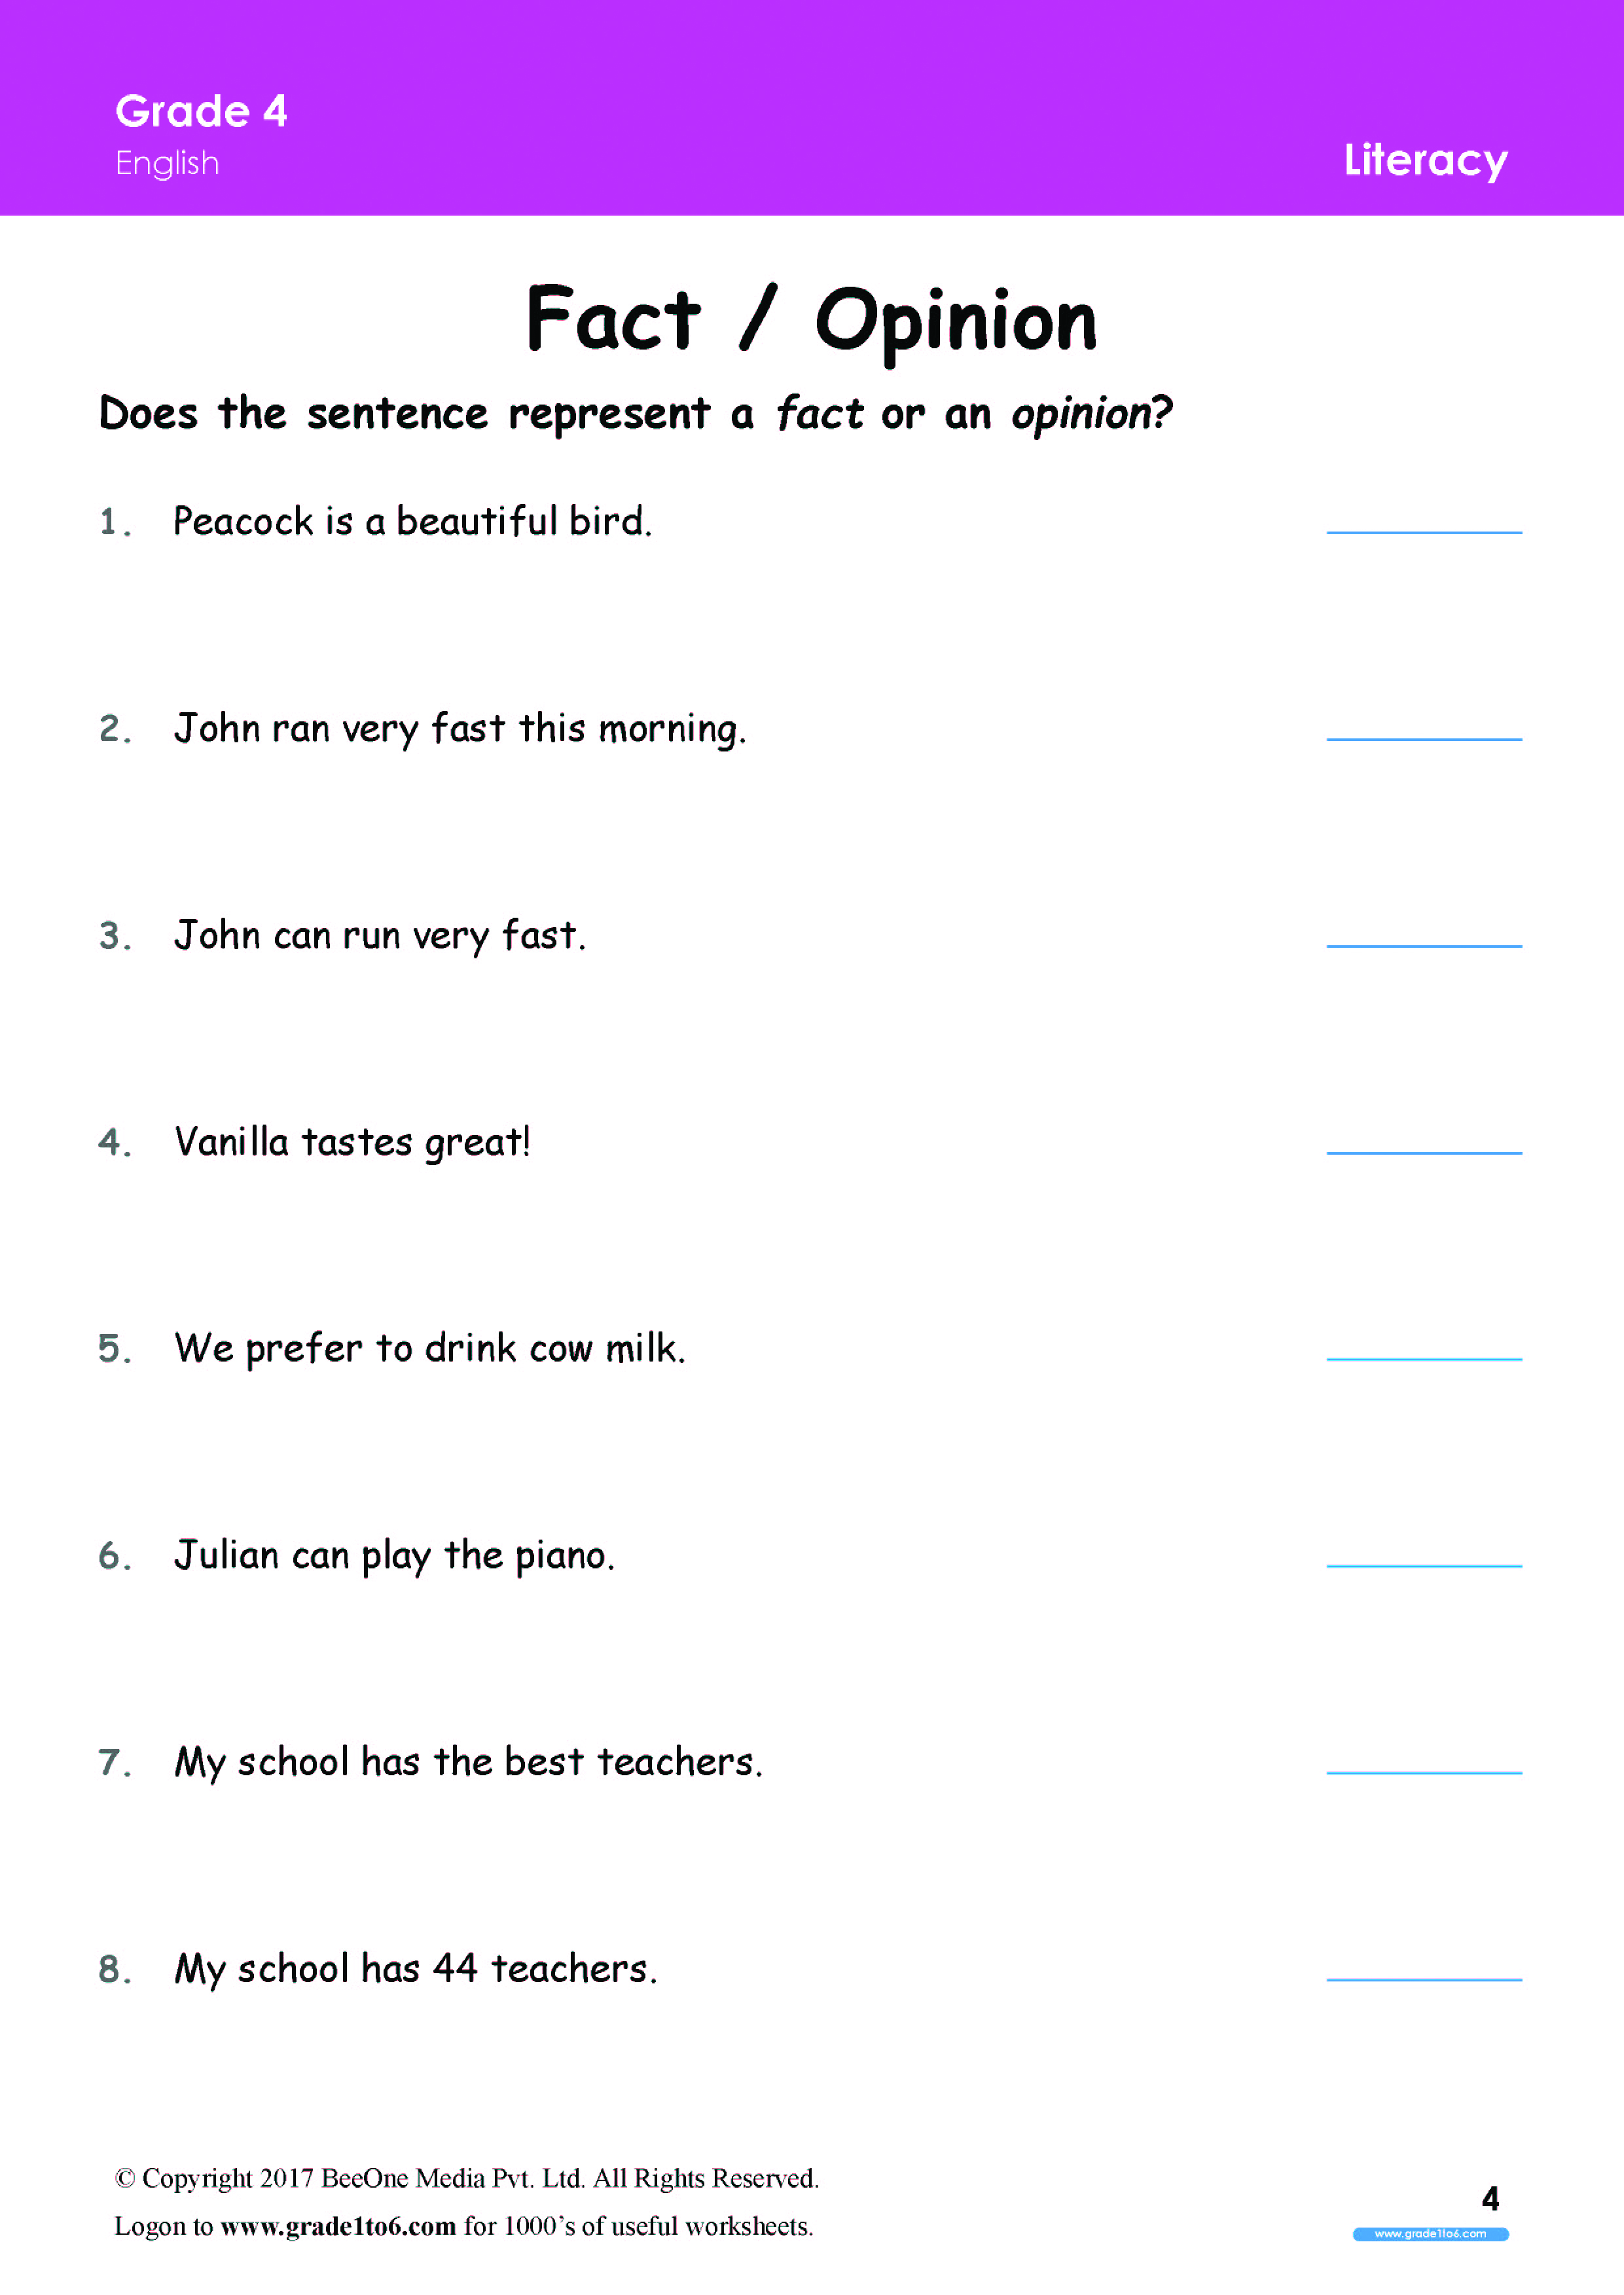 fact-and-opinion-worksheets-for-grade-4-www-grade1to6